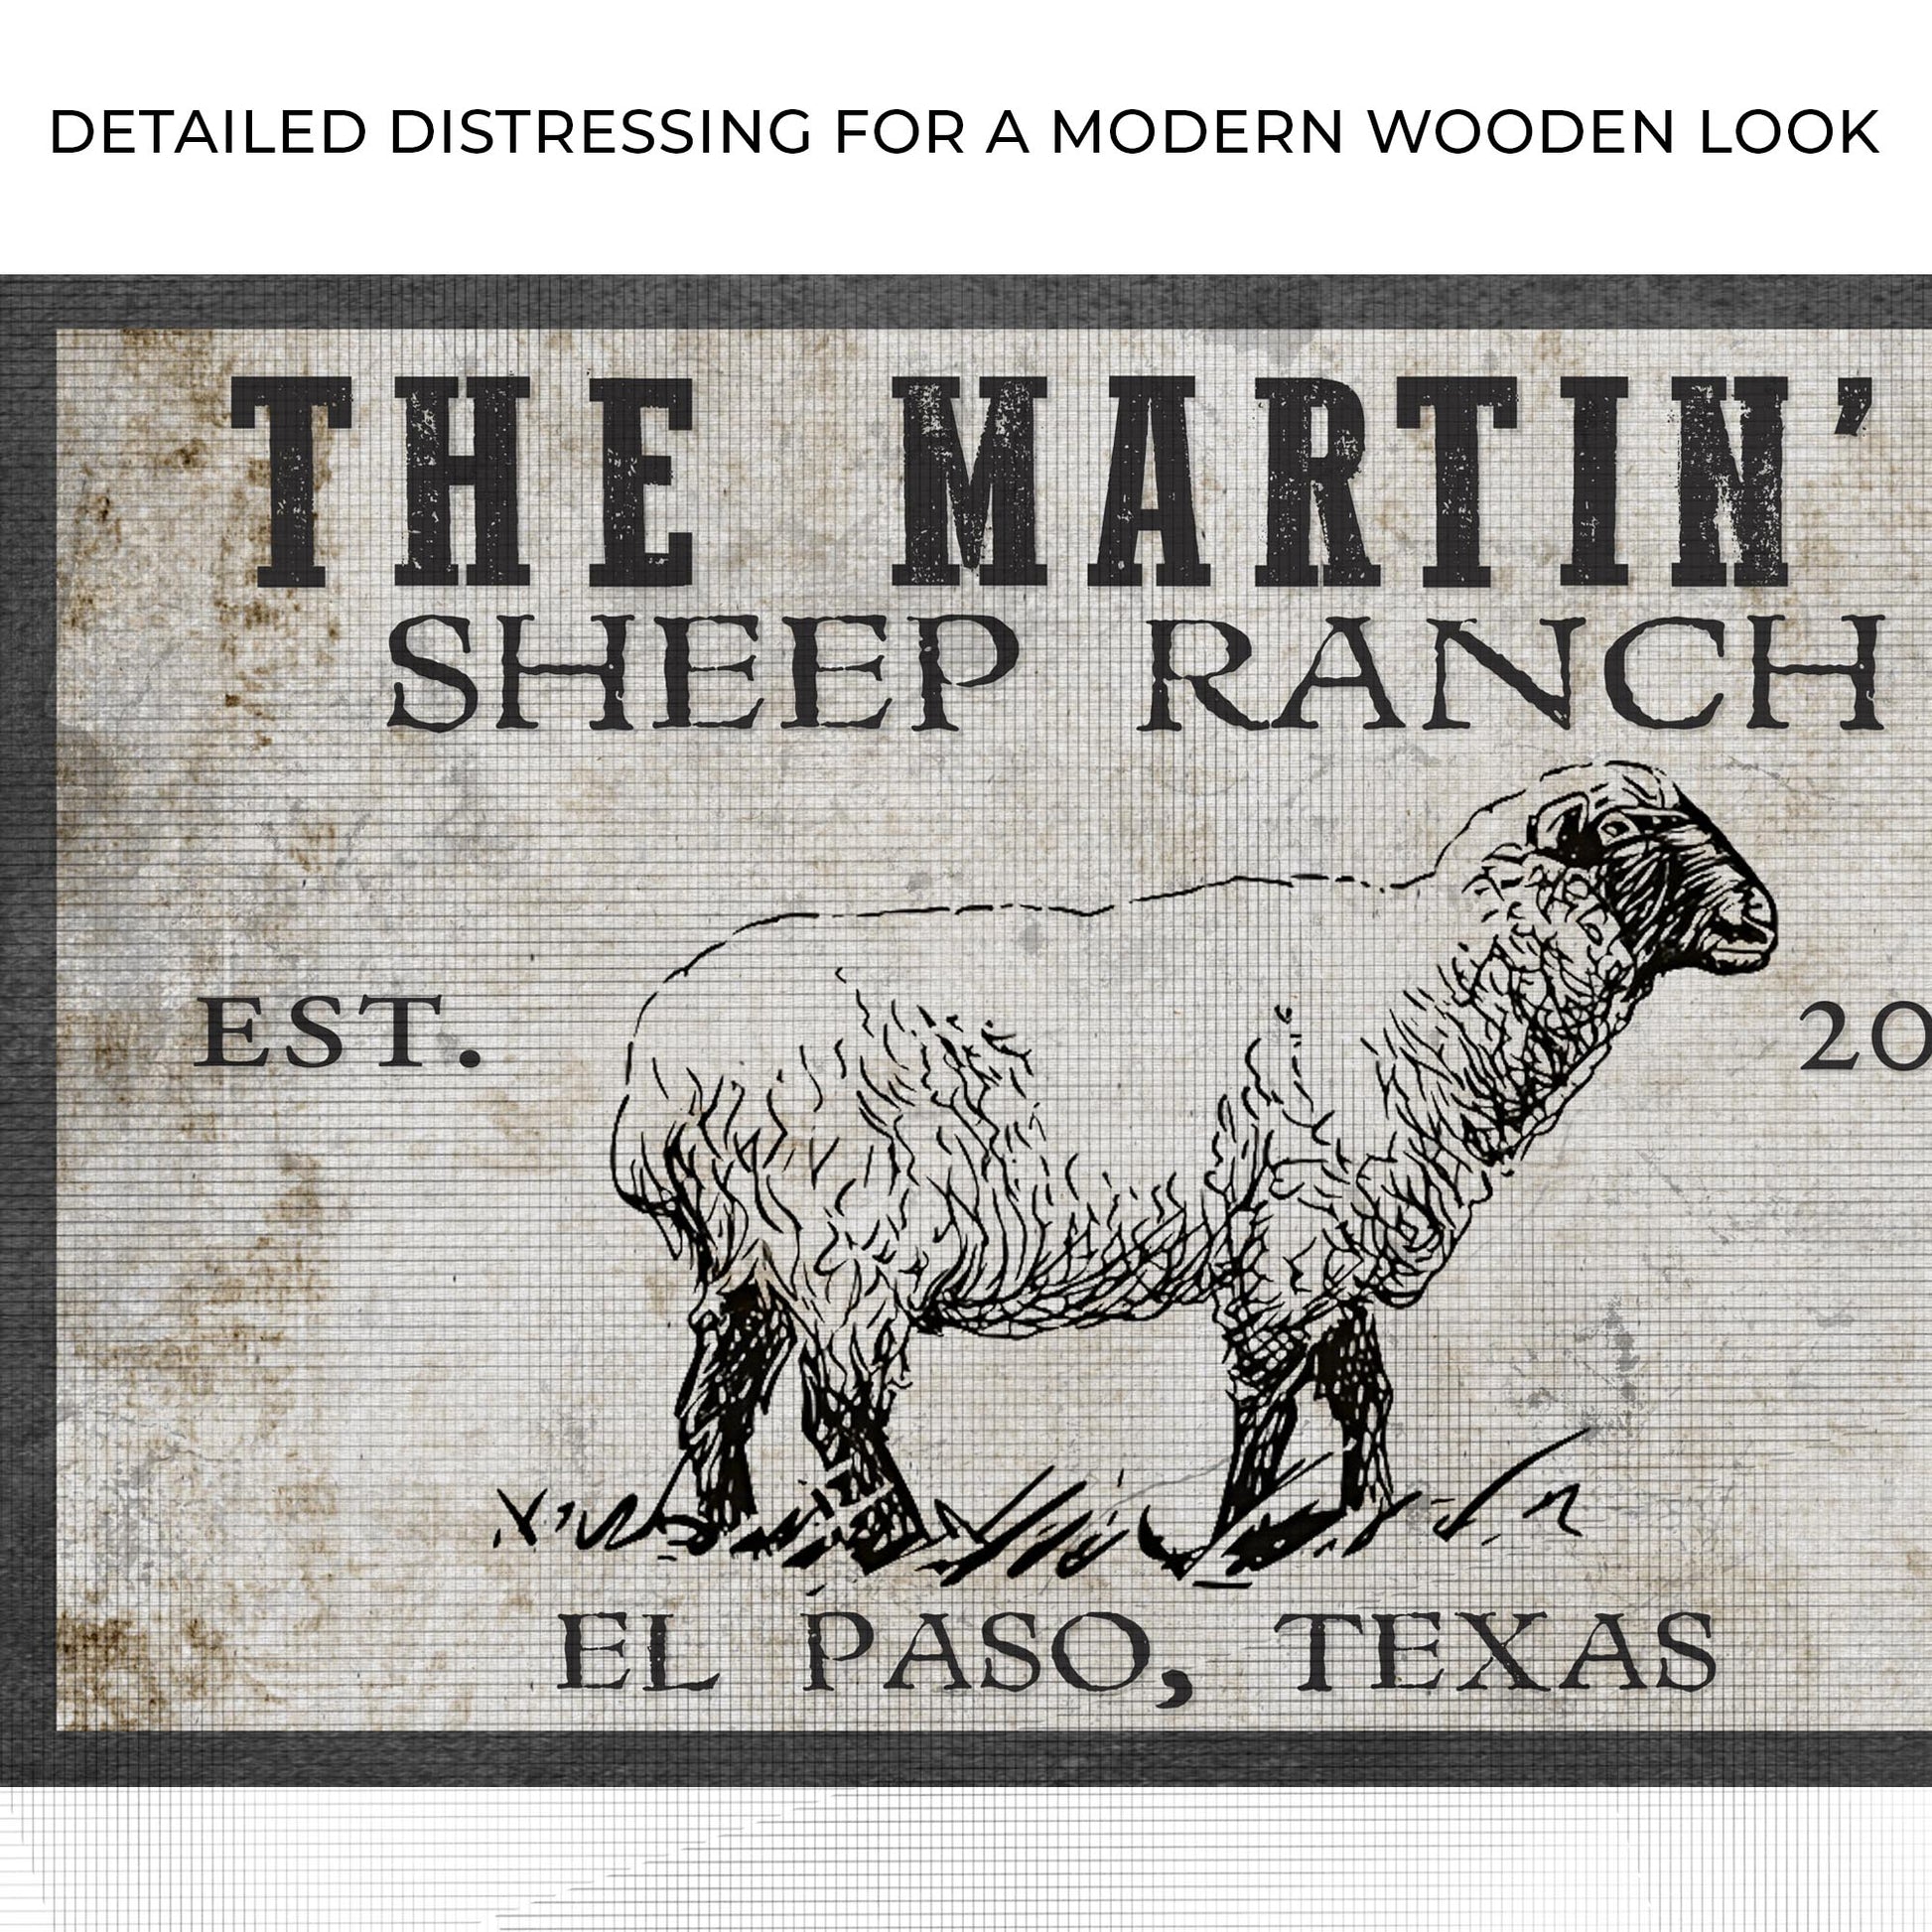 Sheep Ranch Sign II  Zoom - Image by Tailored Canvases